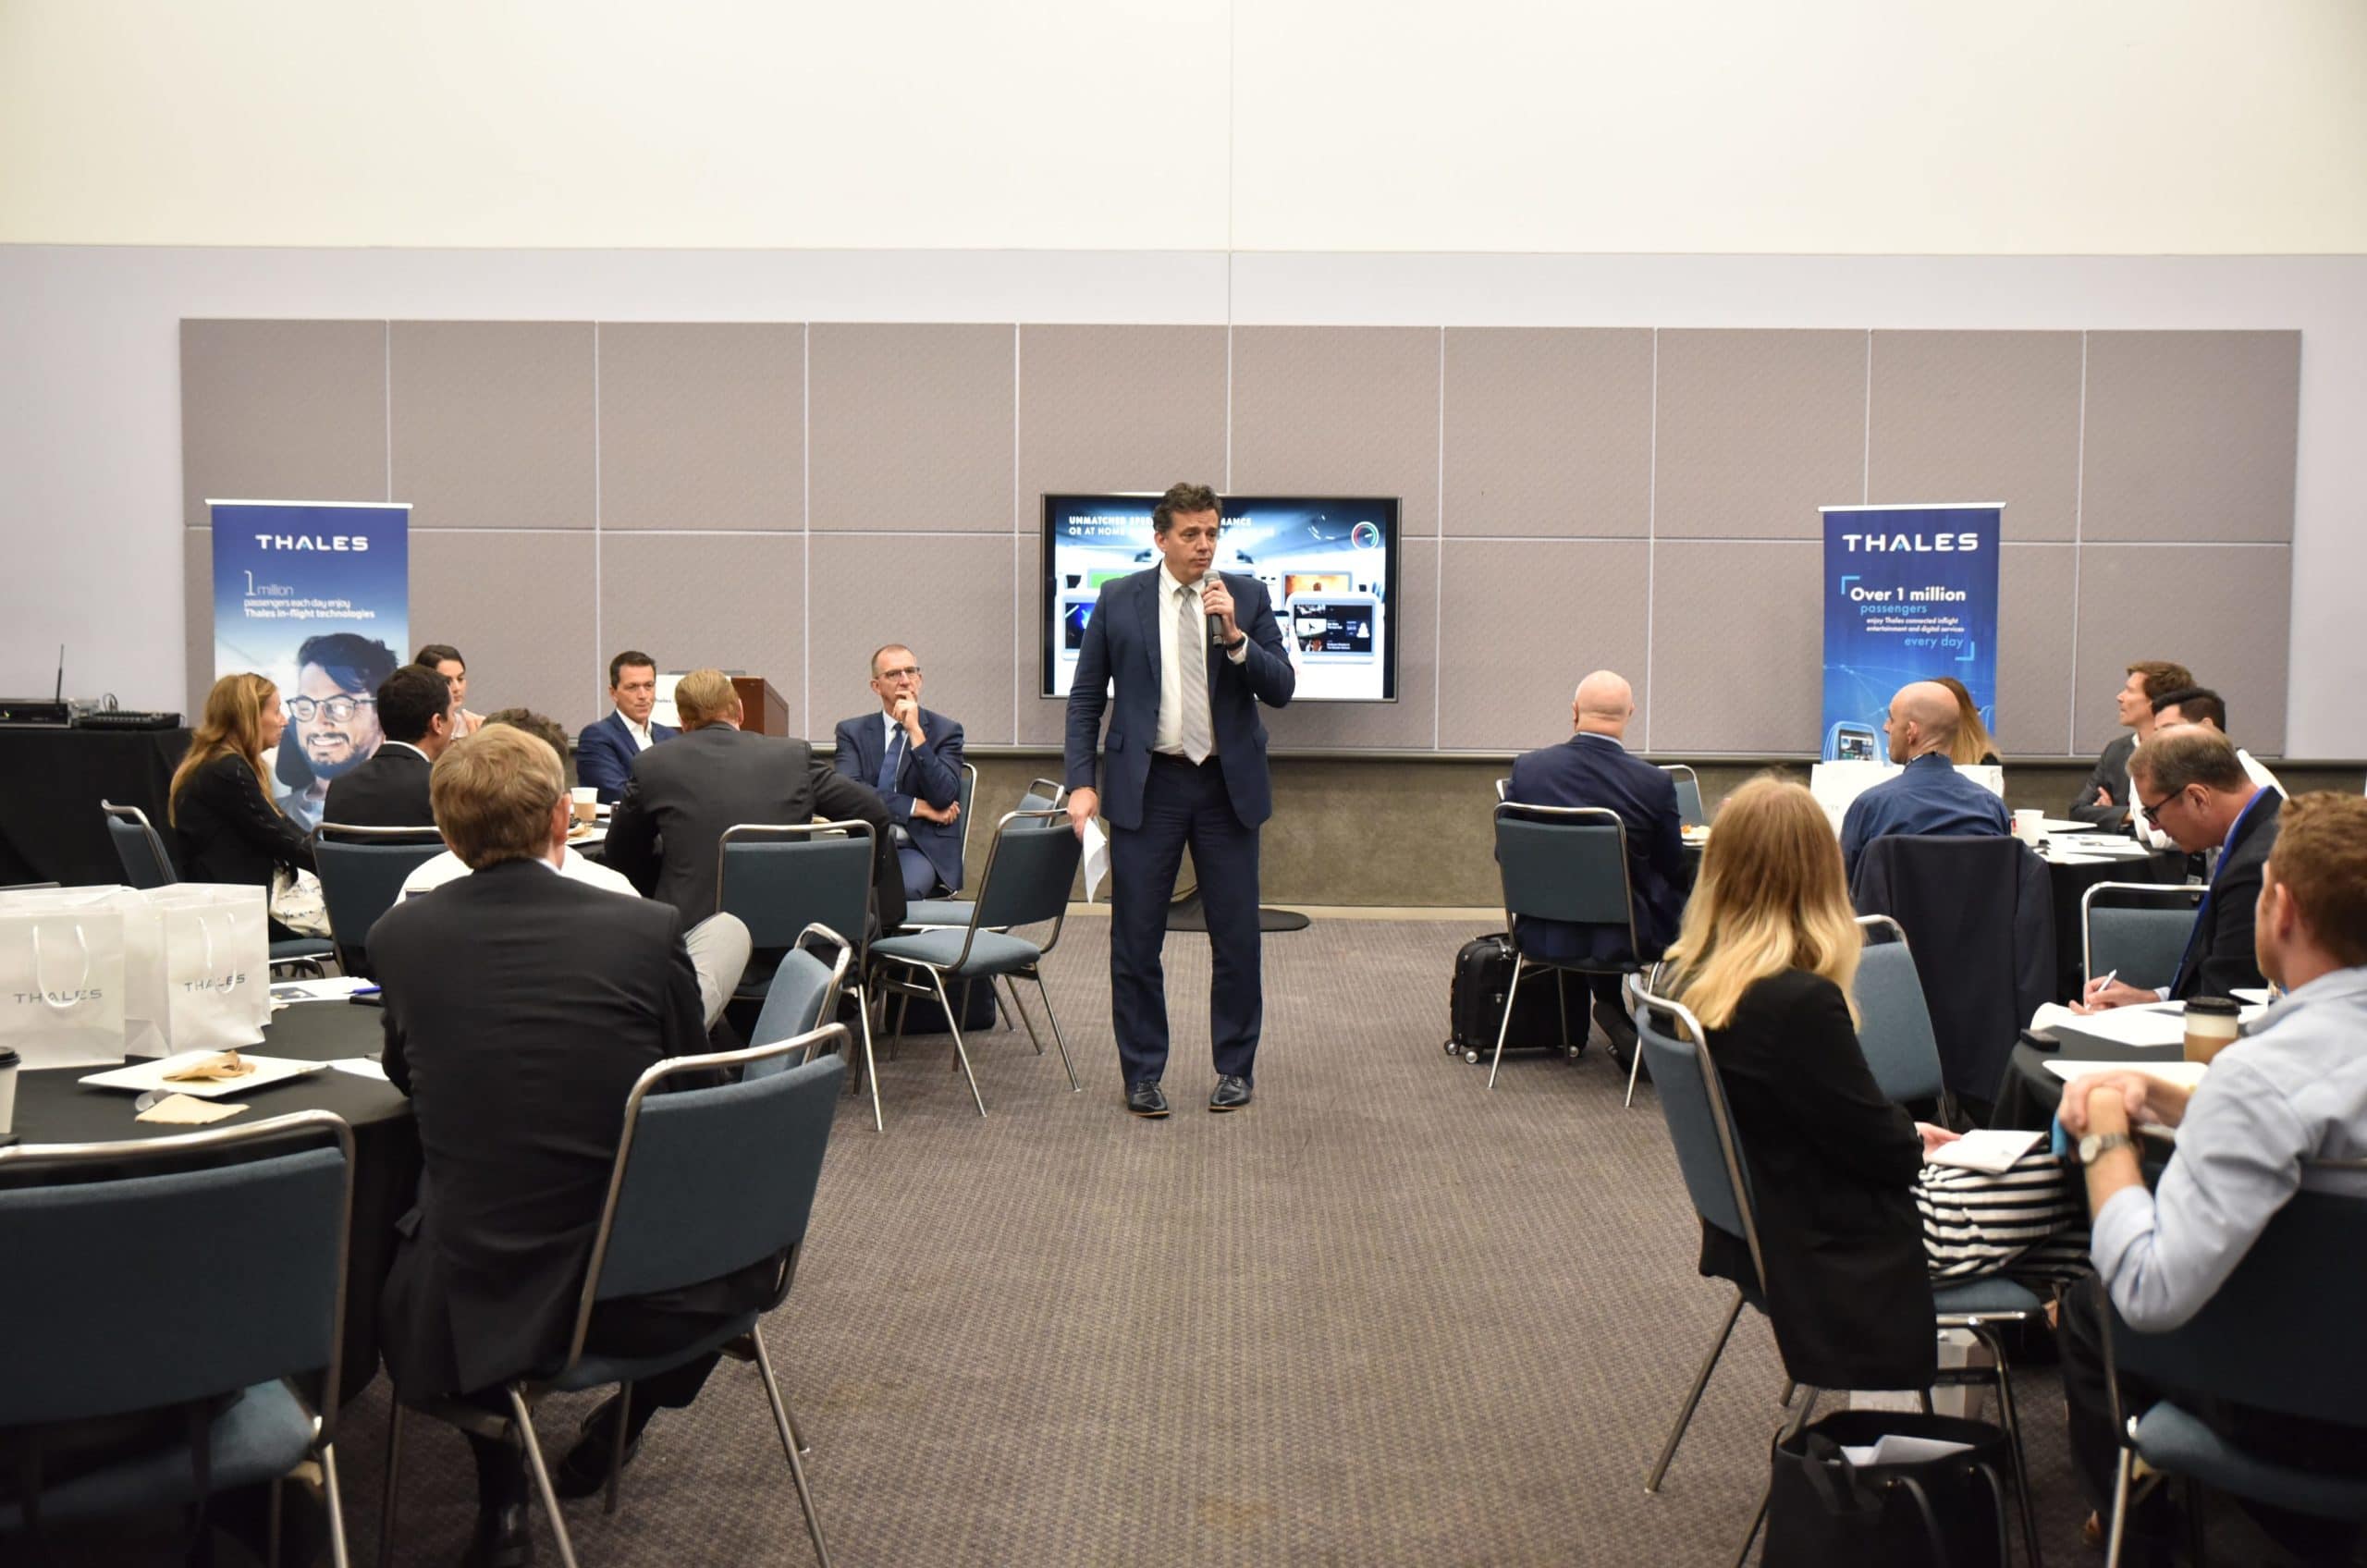 CEO of Airfree, Etienne de Verdelhan, speaking at the Thales media luncheon during APEX EXPO 2019